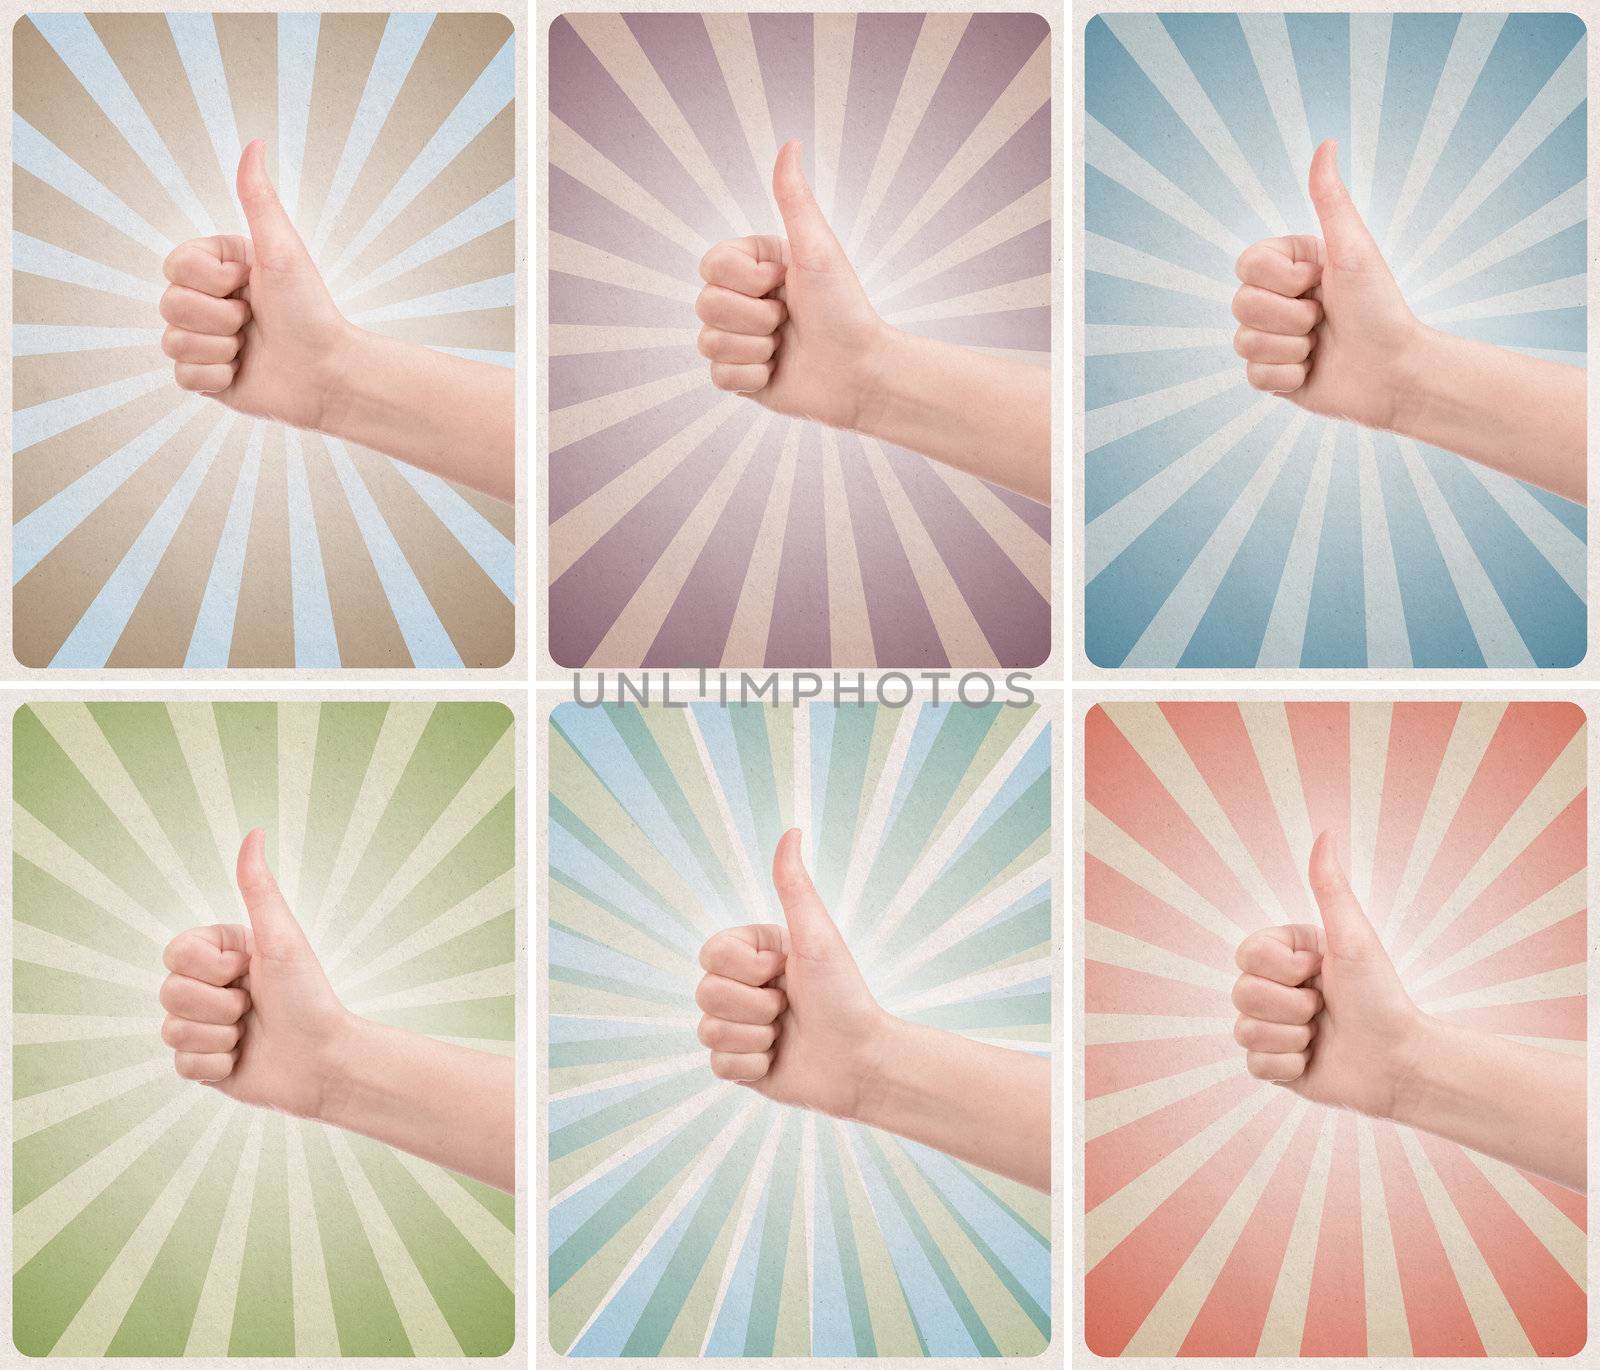 Set of retro style poster with thumb up gesture by bloomua